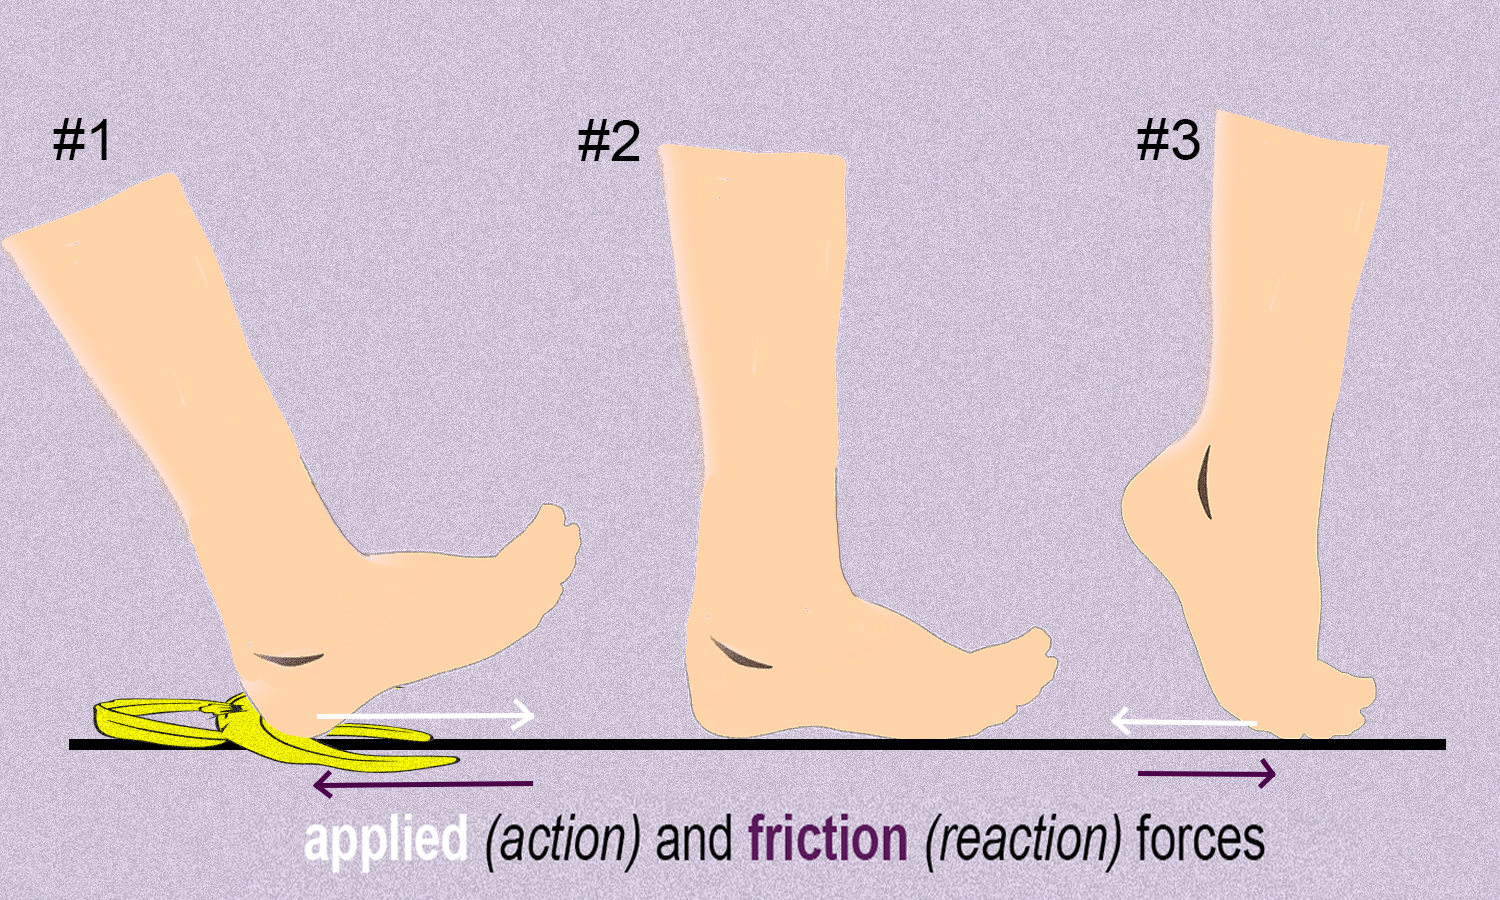 image of applied action and friction reaction